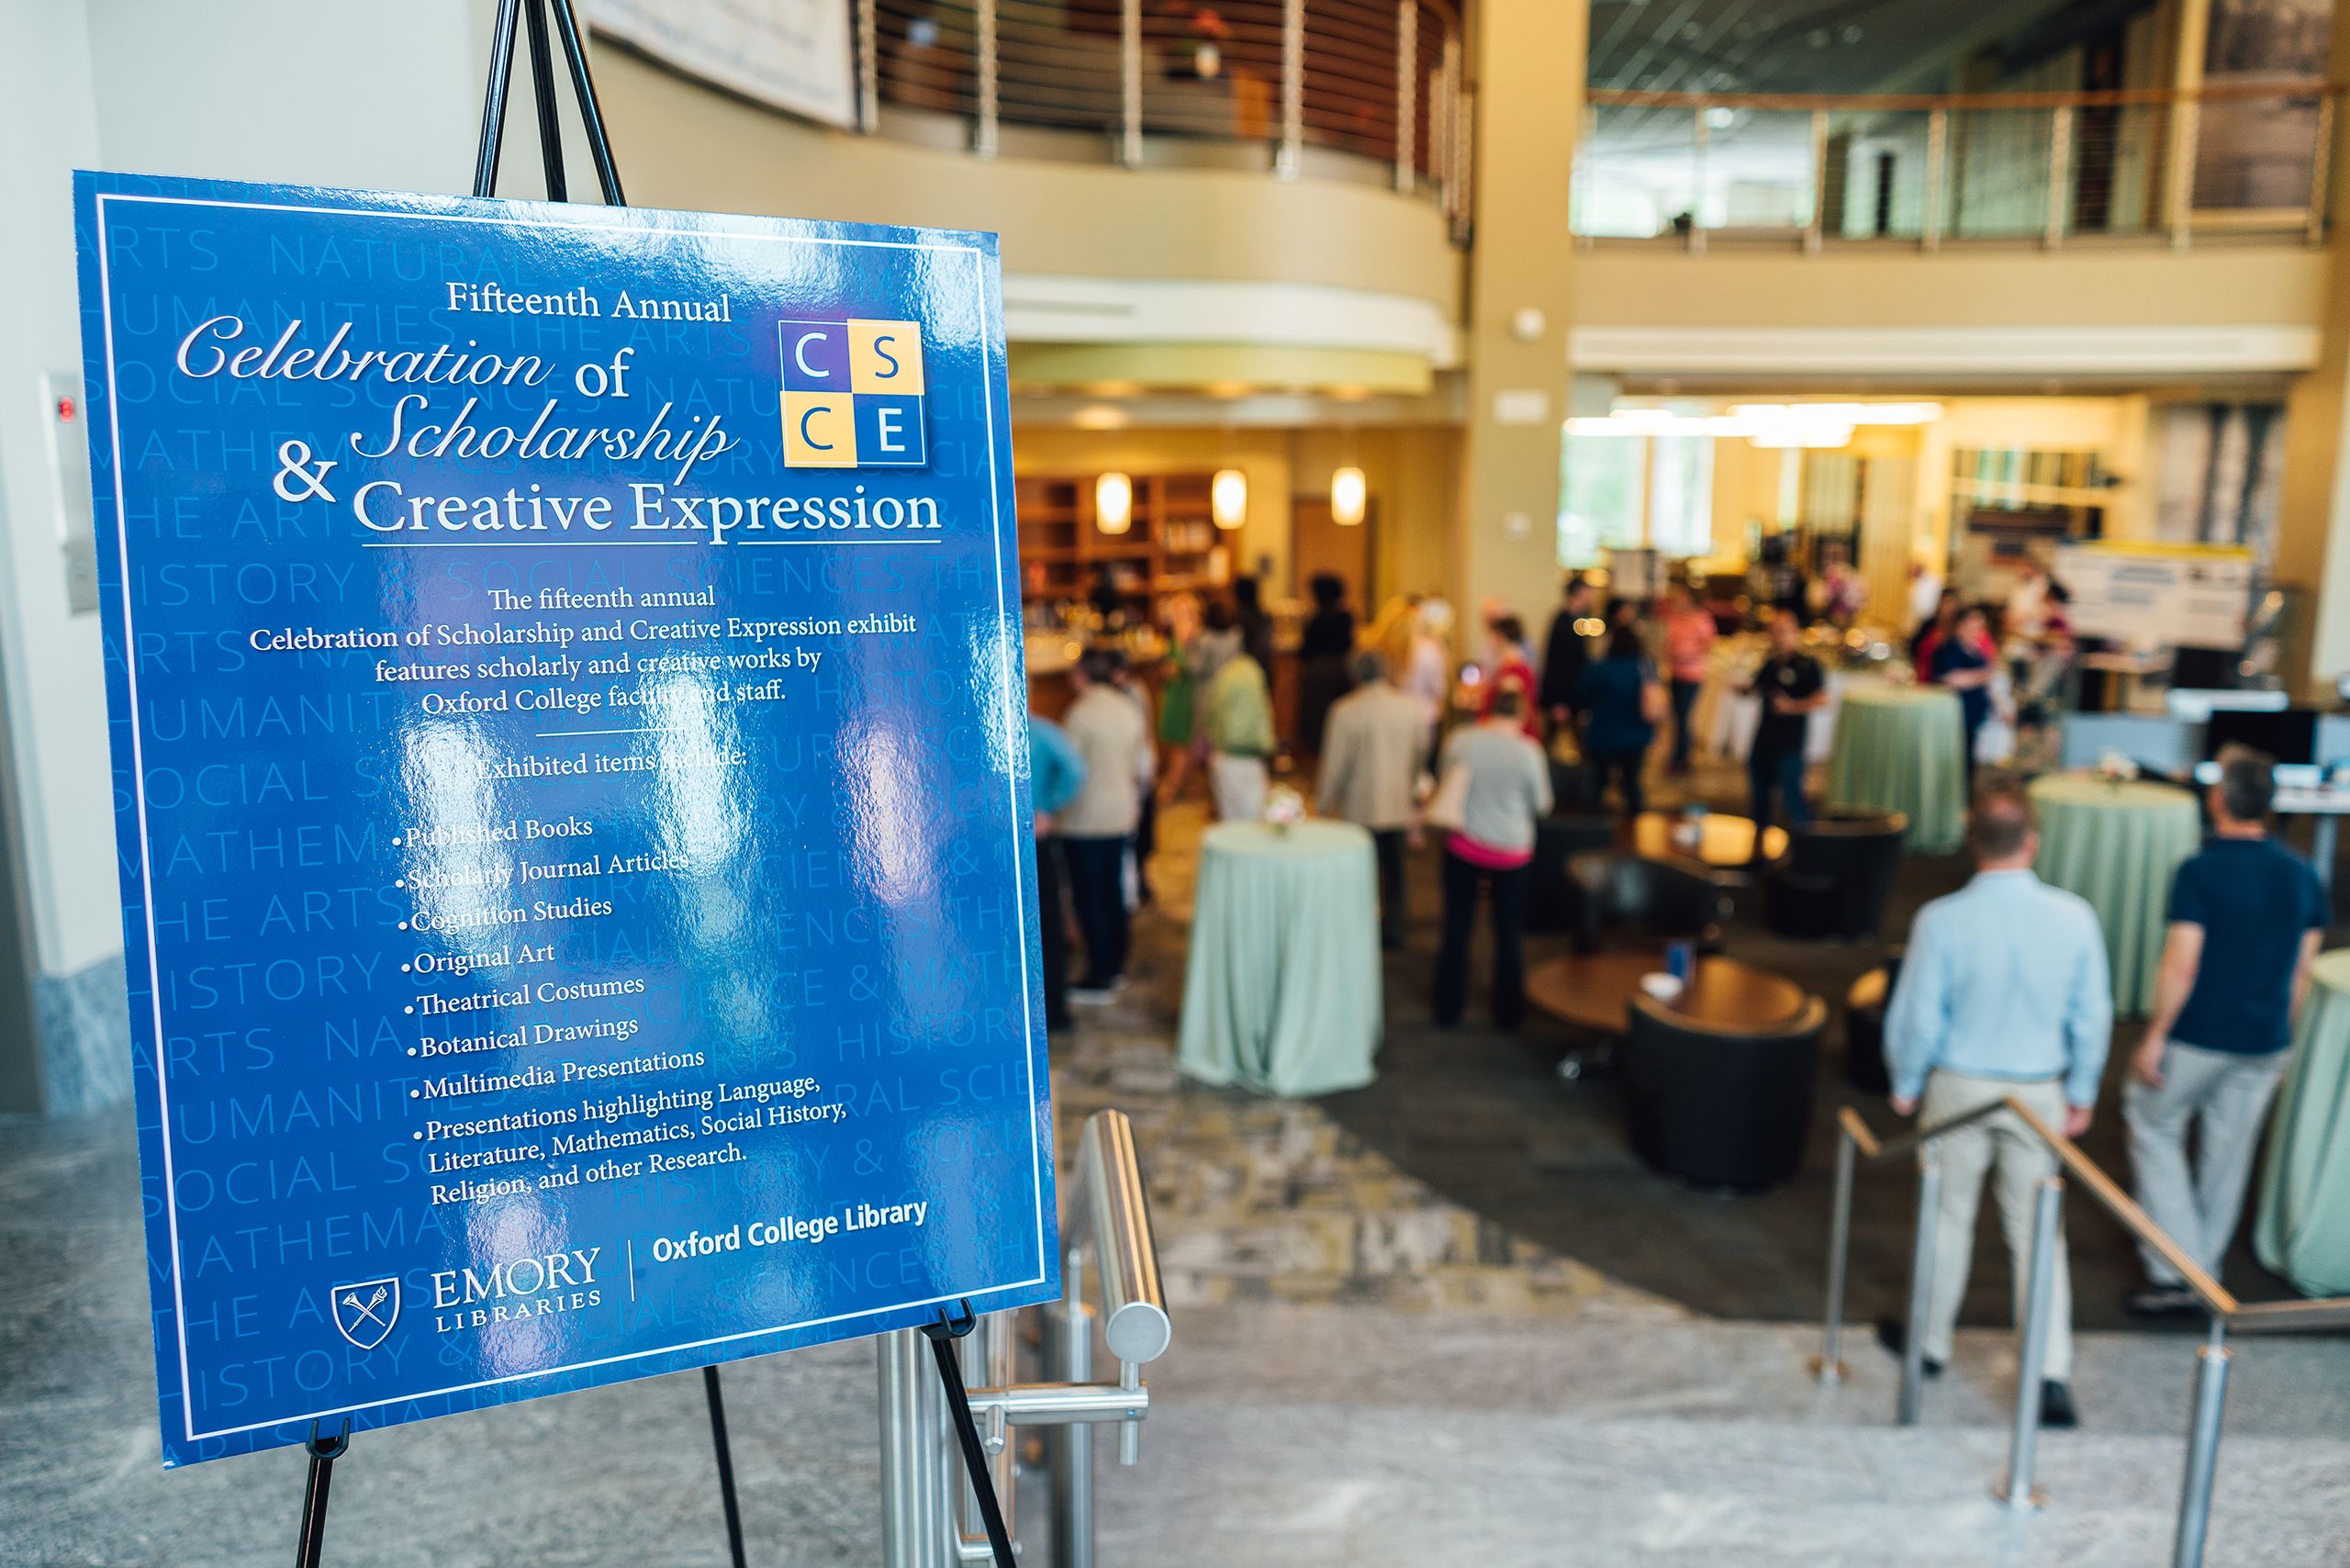 The Celebration of Scholarship and Creative Expression library exhibit allows the Oxford community to share and celebrate the talents of Oxford College faculty and staff.   